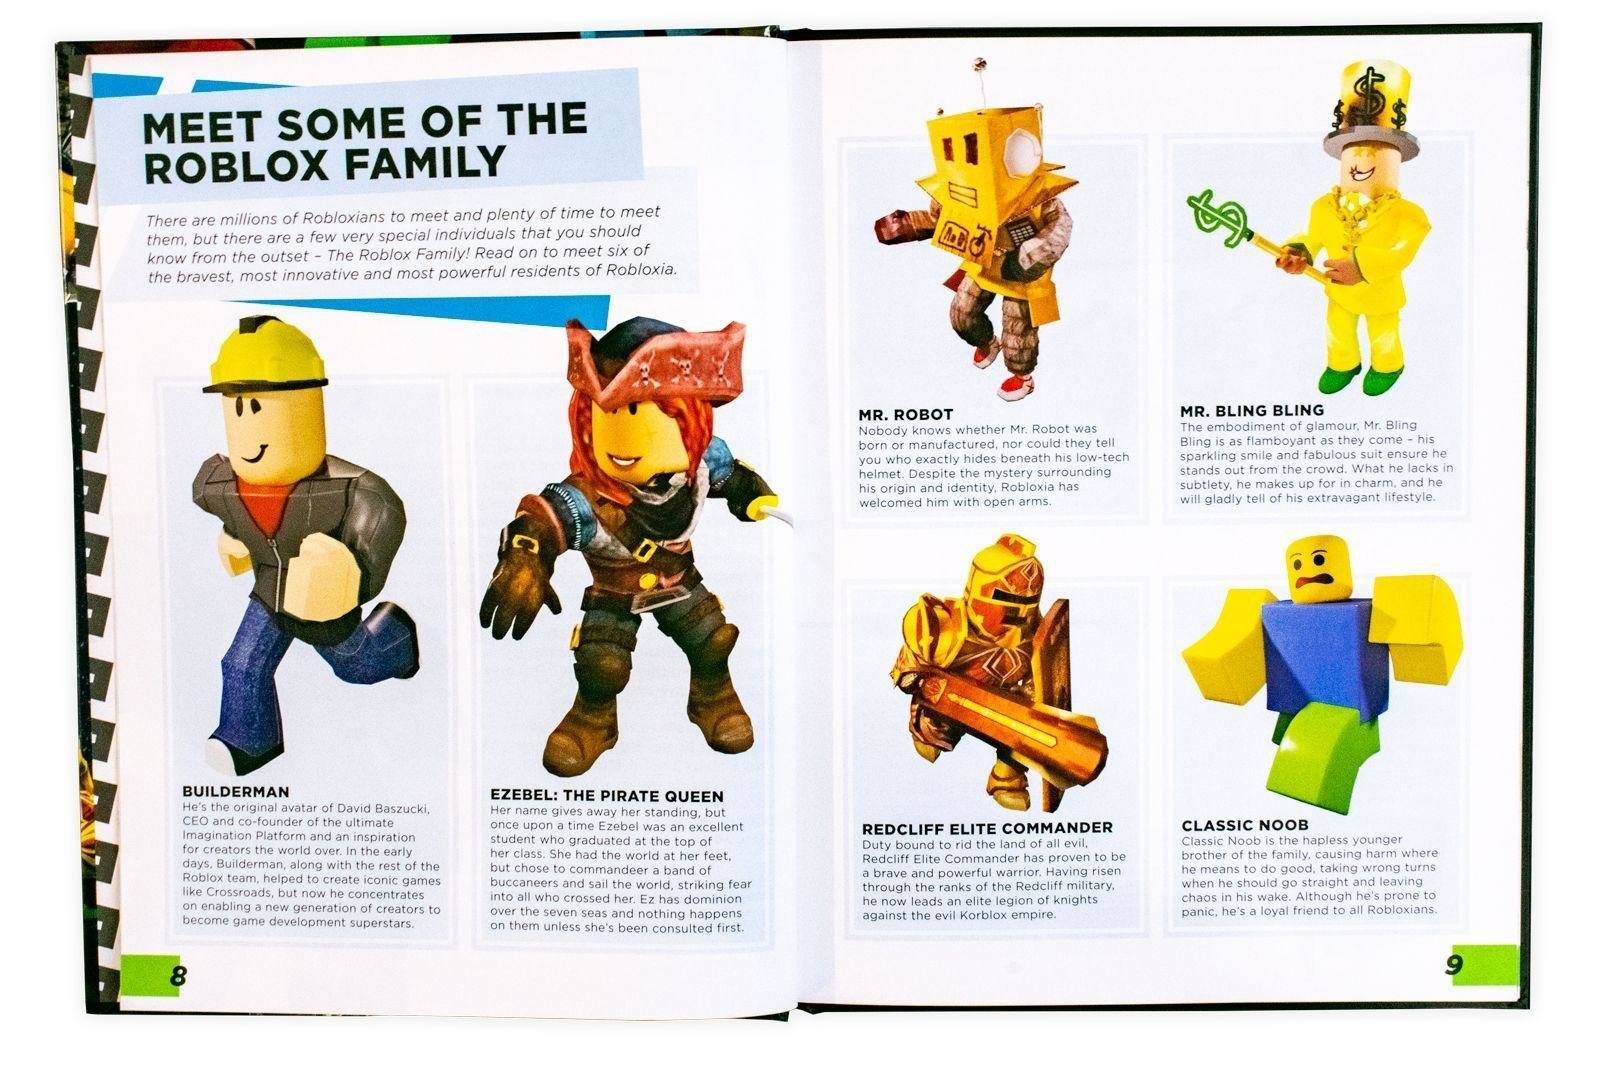 Roblox Noob Series: The Star Crest Crew: Toy Book (Paperback) 